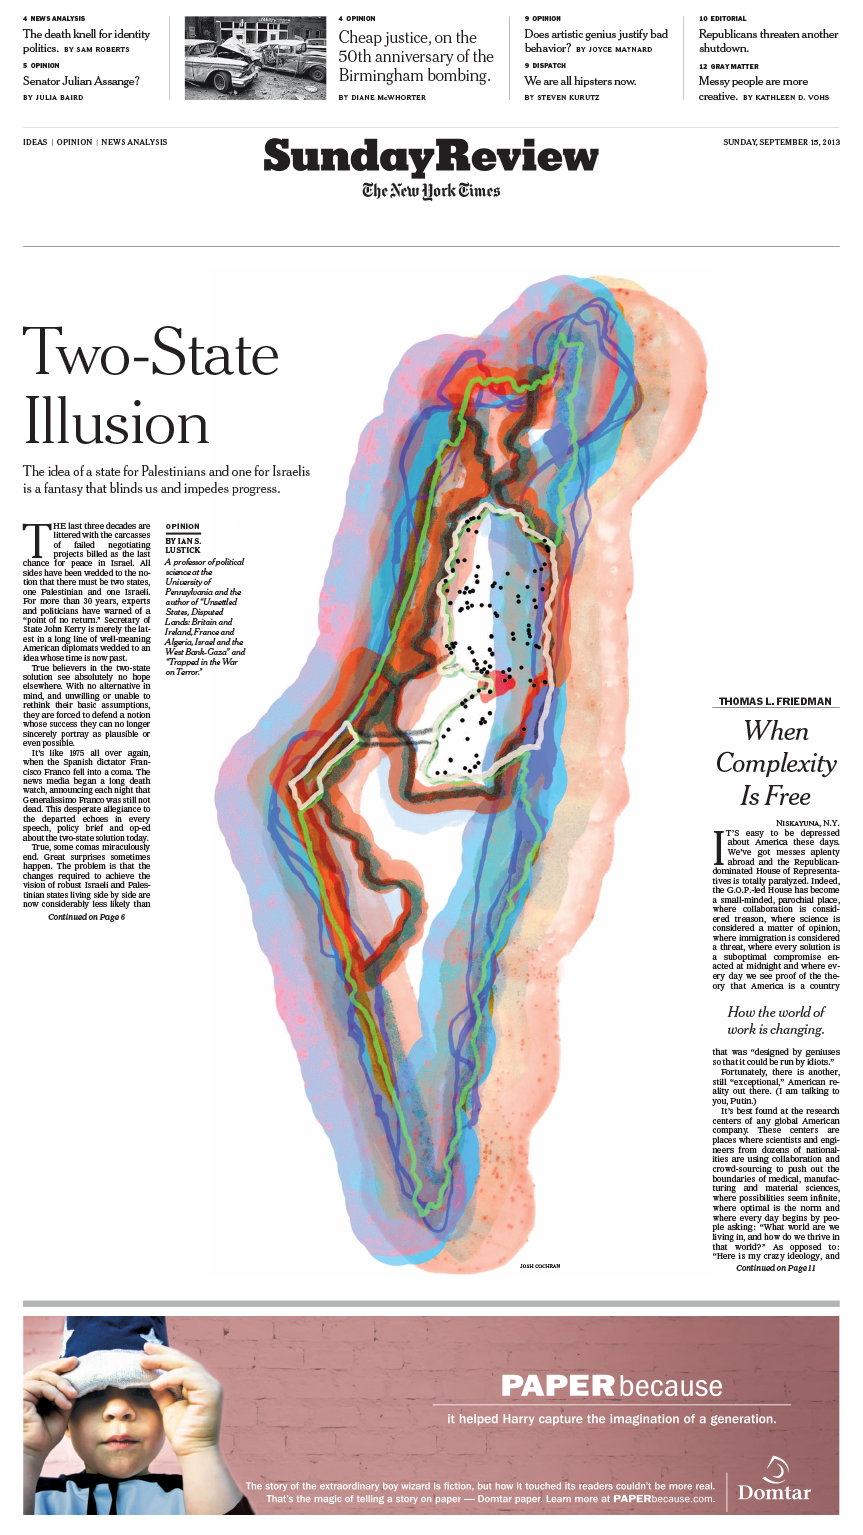 Sunday Review Cover: Two-State Illusion